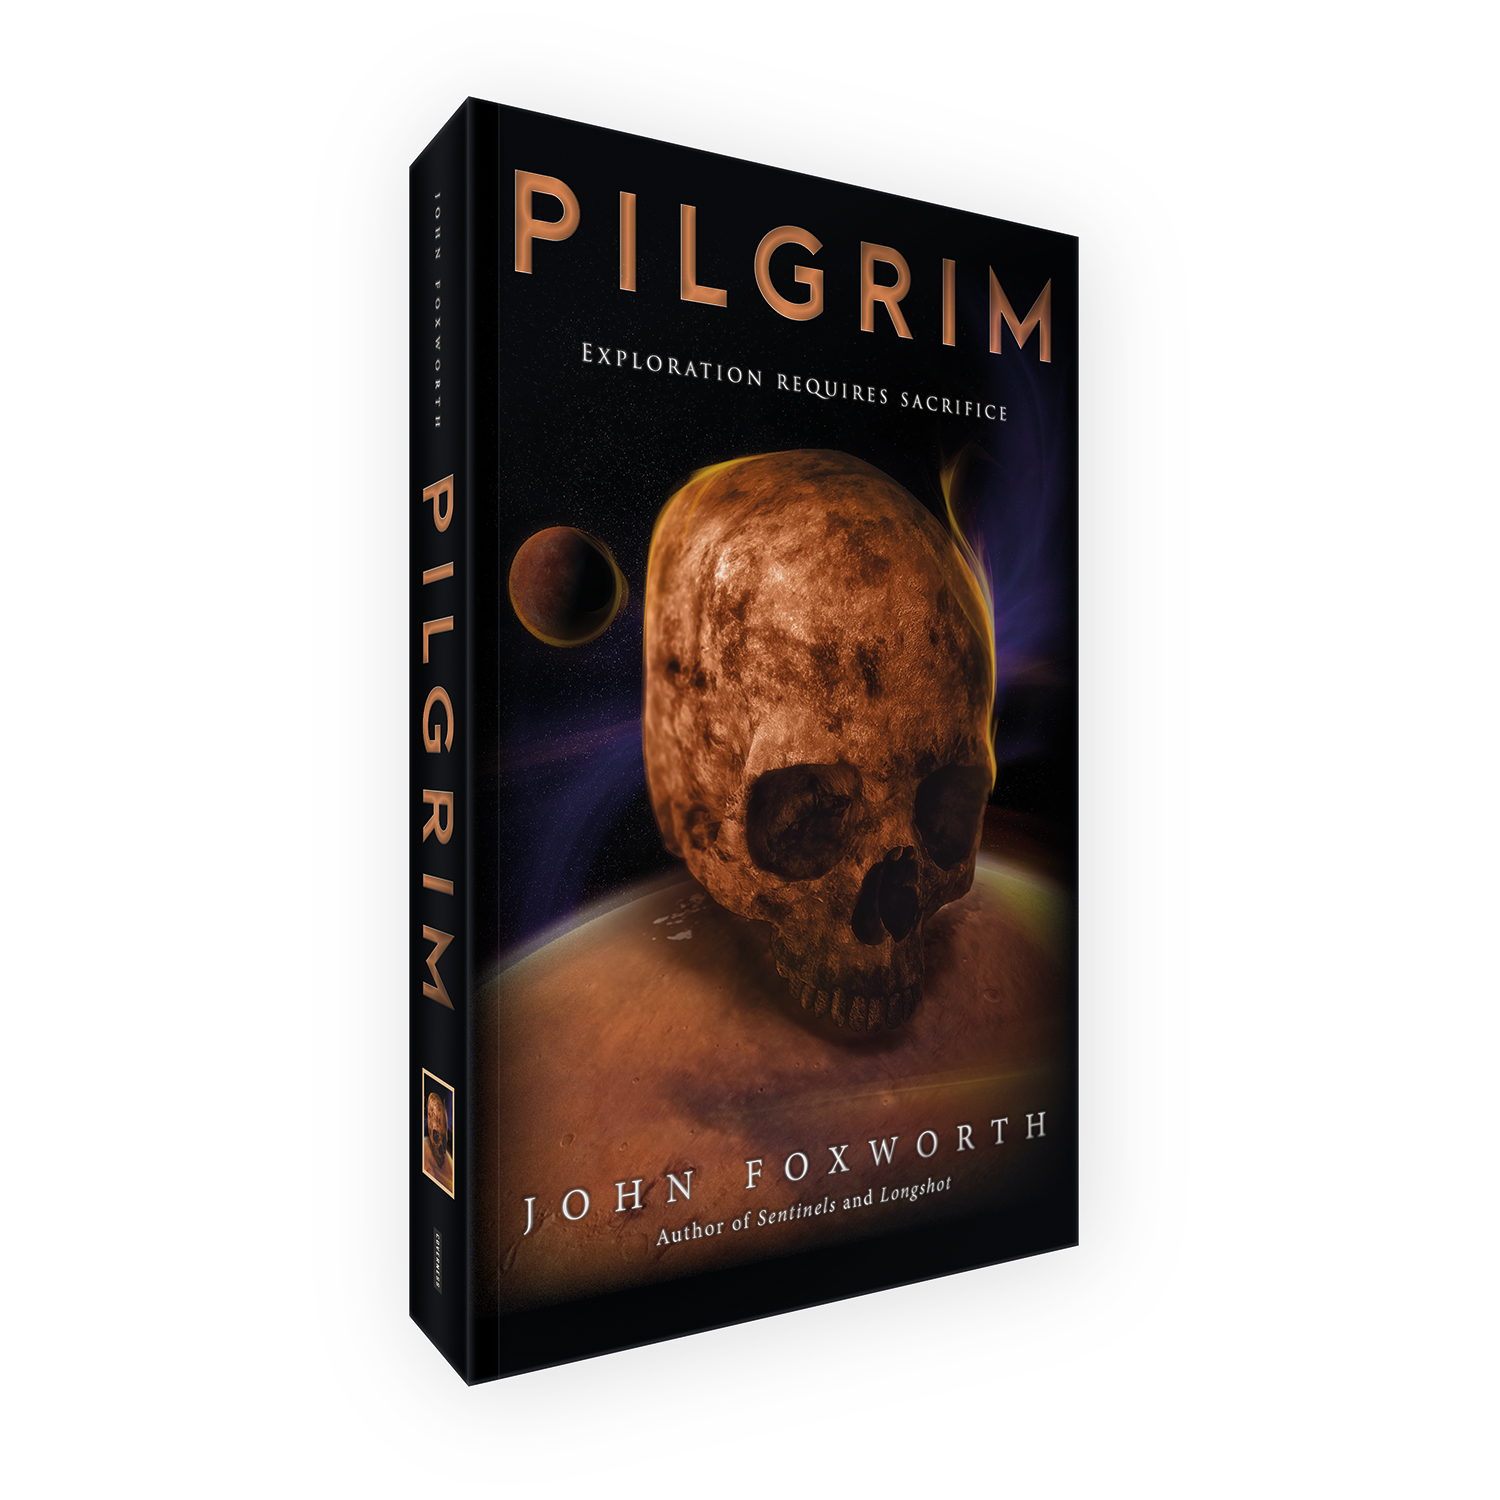 'Pilgrim' is a bespoke cover design for a modern deep-space scifi novel. The book cover was designed by Mark Thomas, of coverness.com. To find out more about my book design services, please visit www.coverness.com.